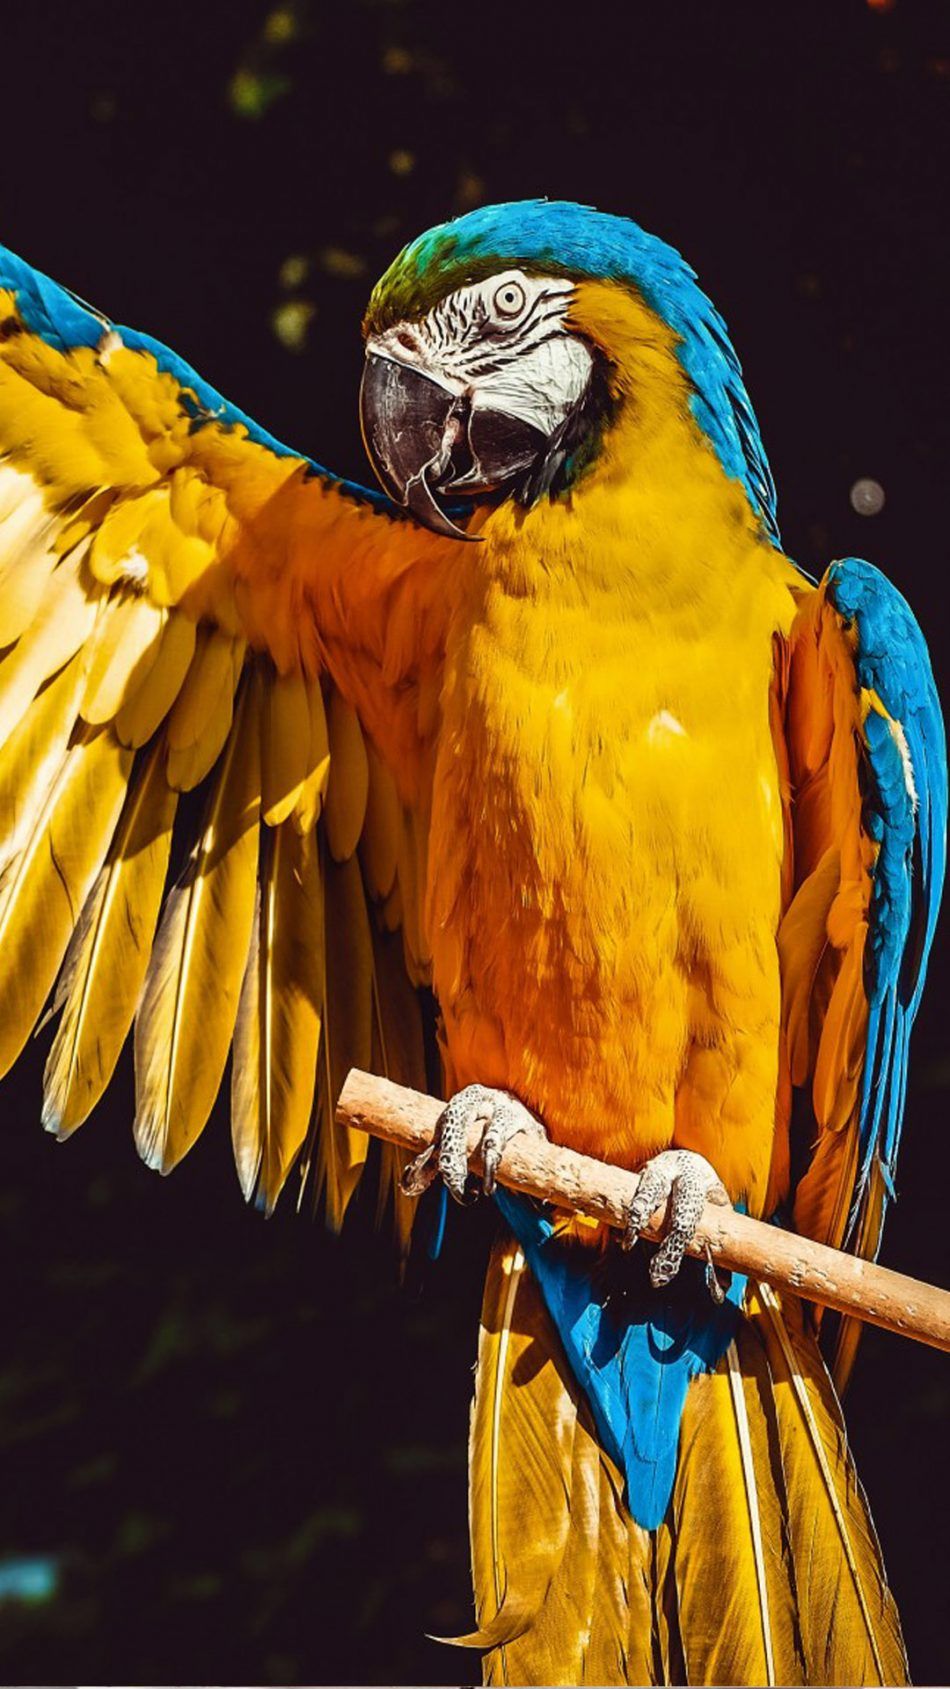 Macaw Wallpapers